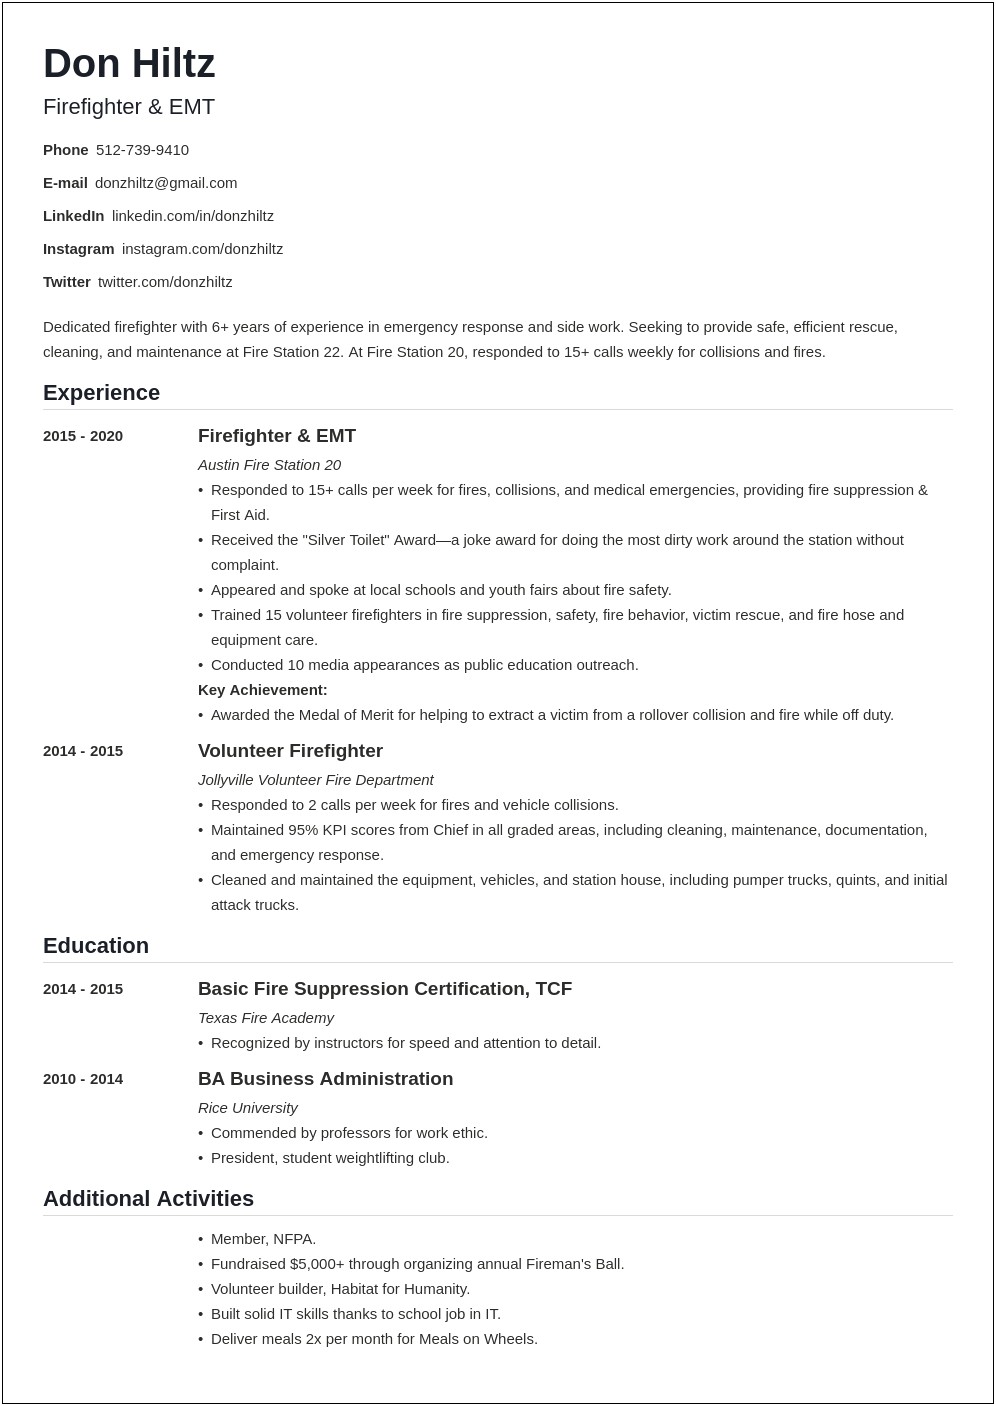 Resume Objective Examples For Firefighter